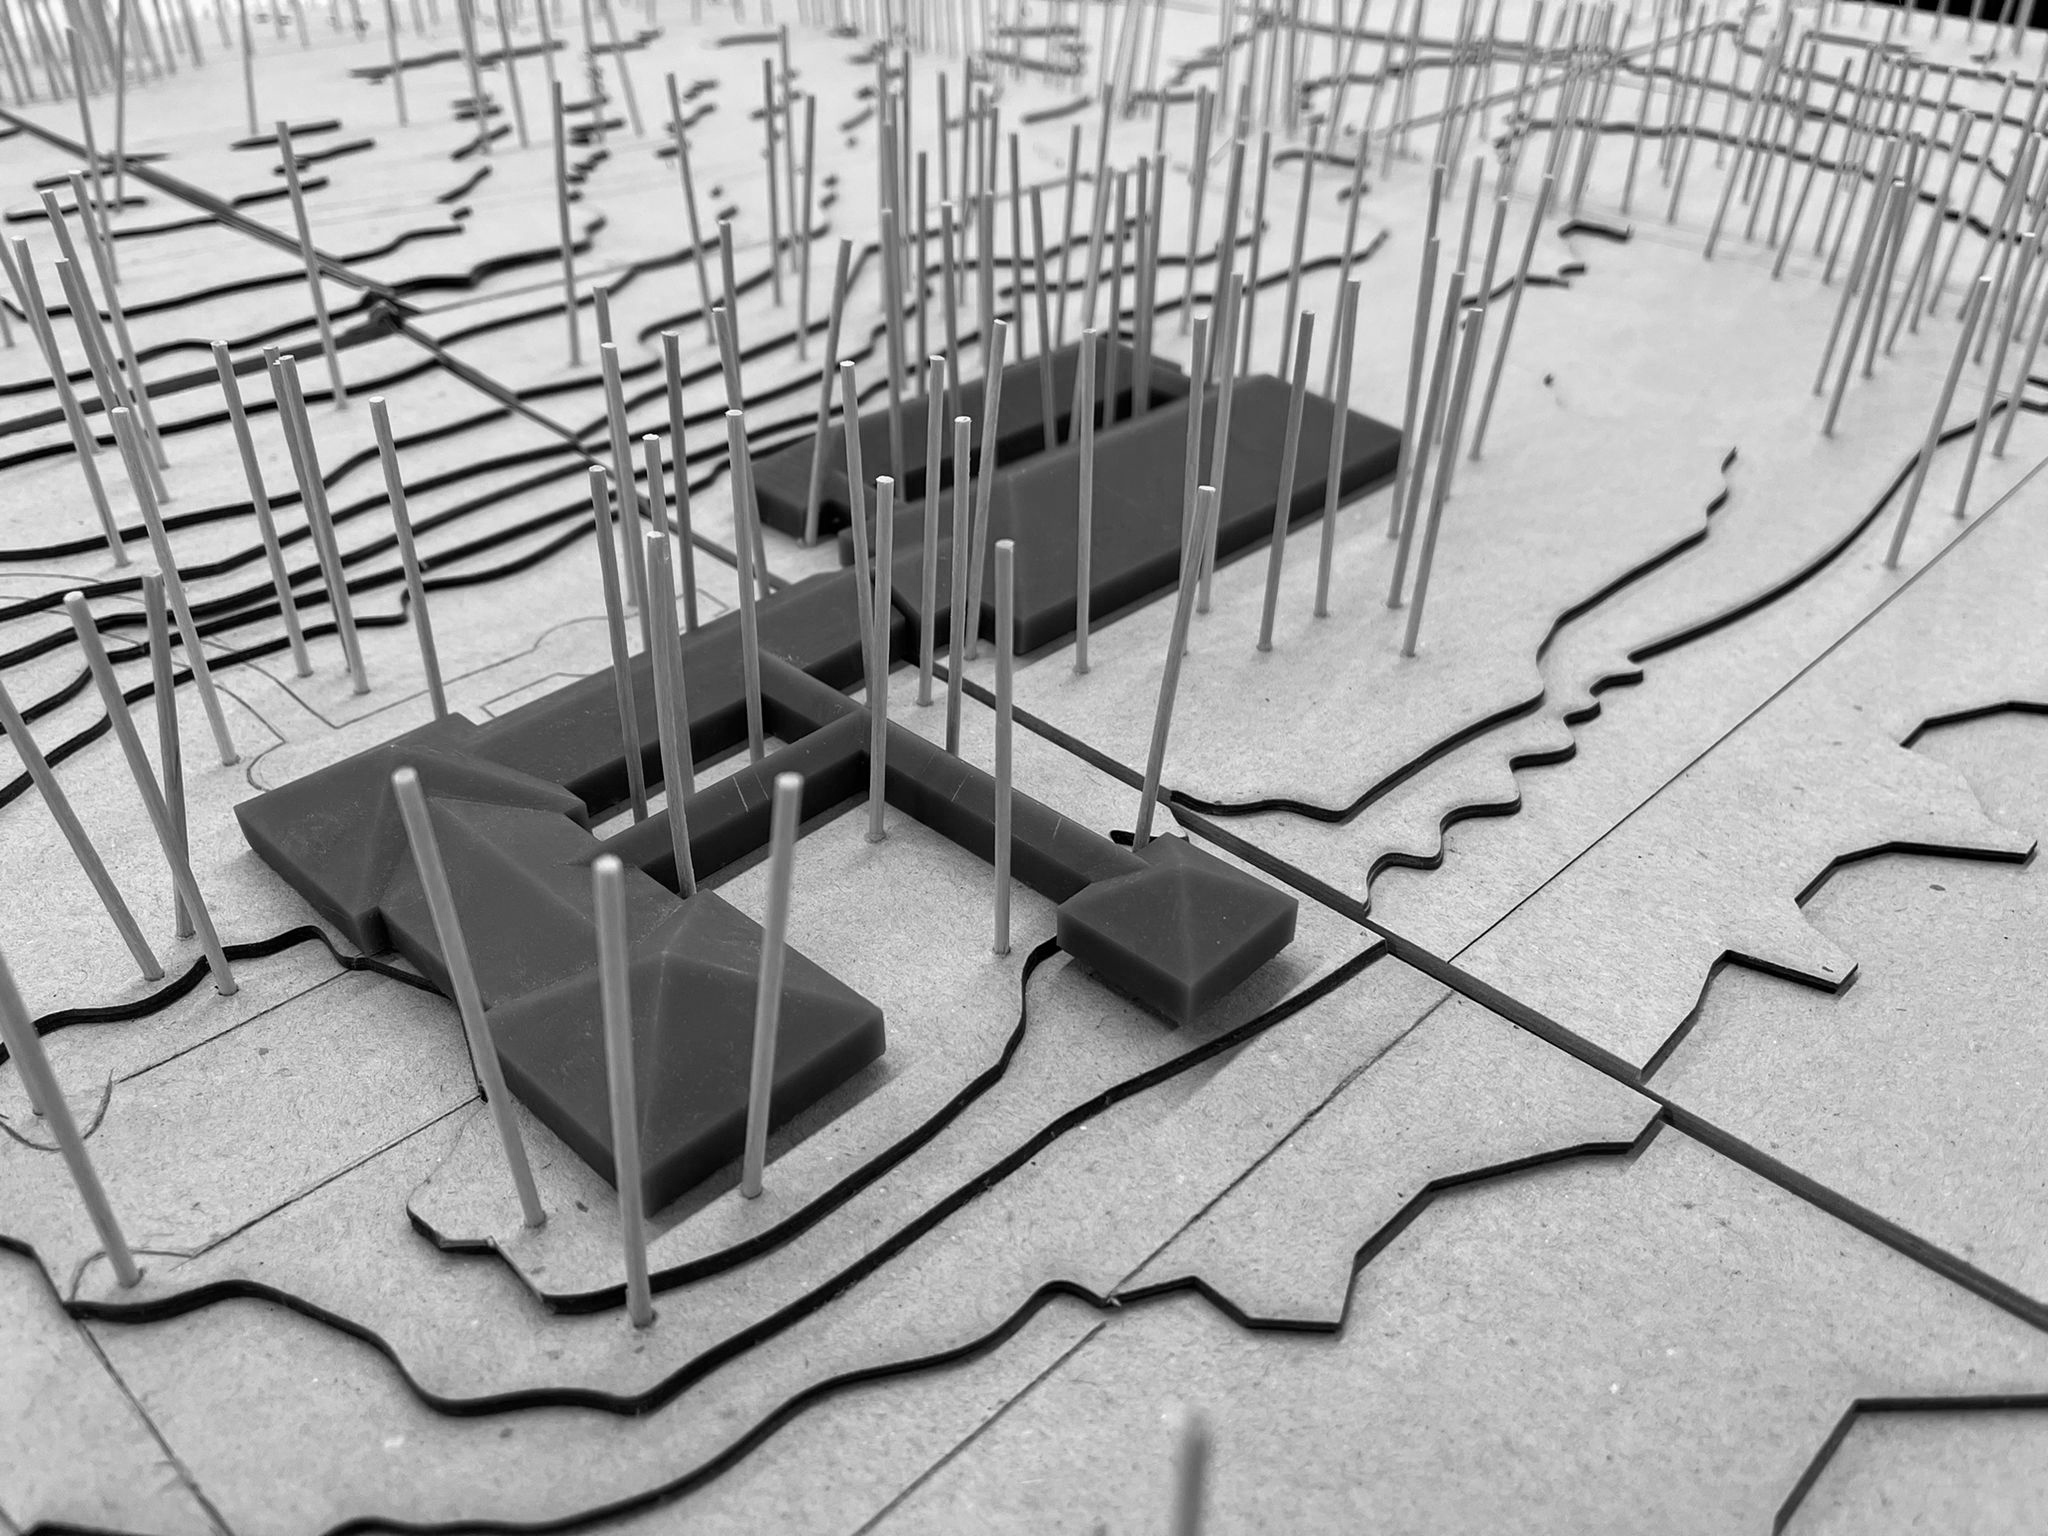 tight image of a building model with wood sticks representing trees